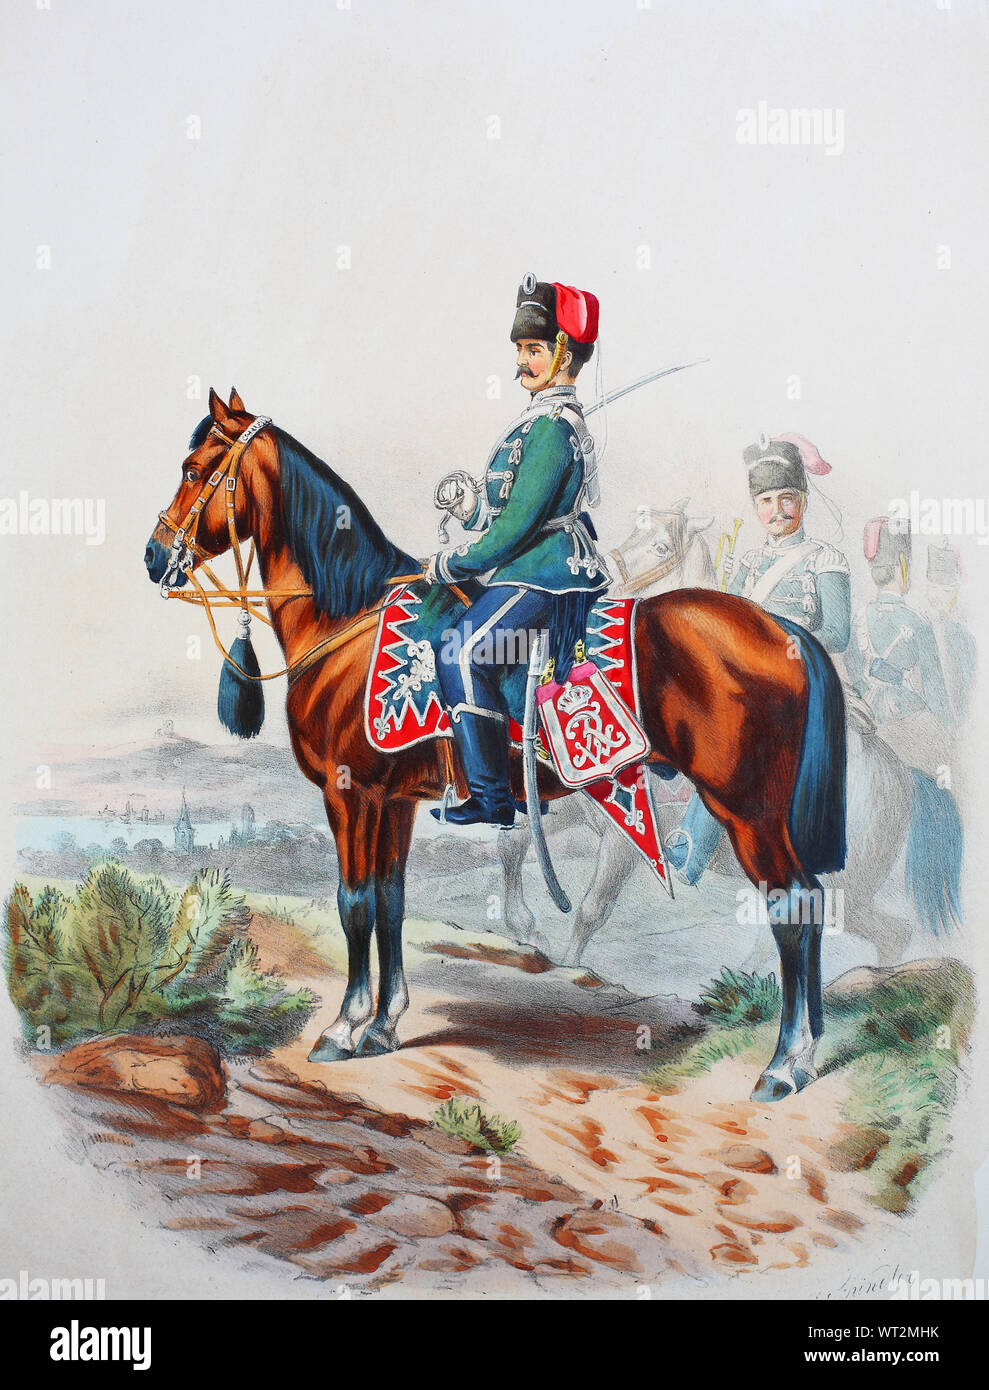 Royal Prussian Army, Guards Corps, Preußens Heer, preussische Garde, Westfälisches Husaren Regiment No.11, Offizier, Trompeter, Digital improved reproduction of an illustration from the 19th century Stock Photo